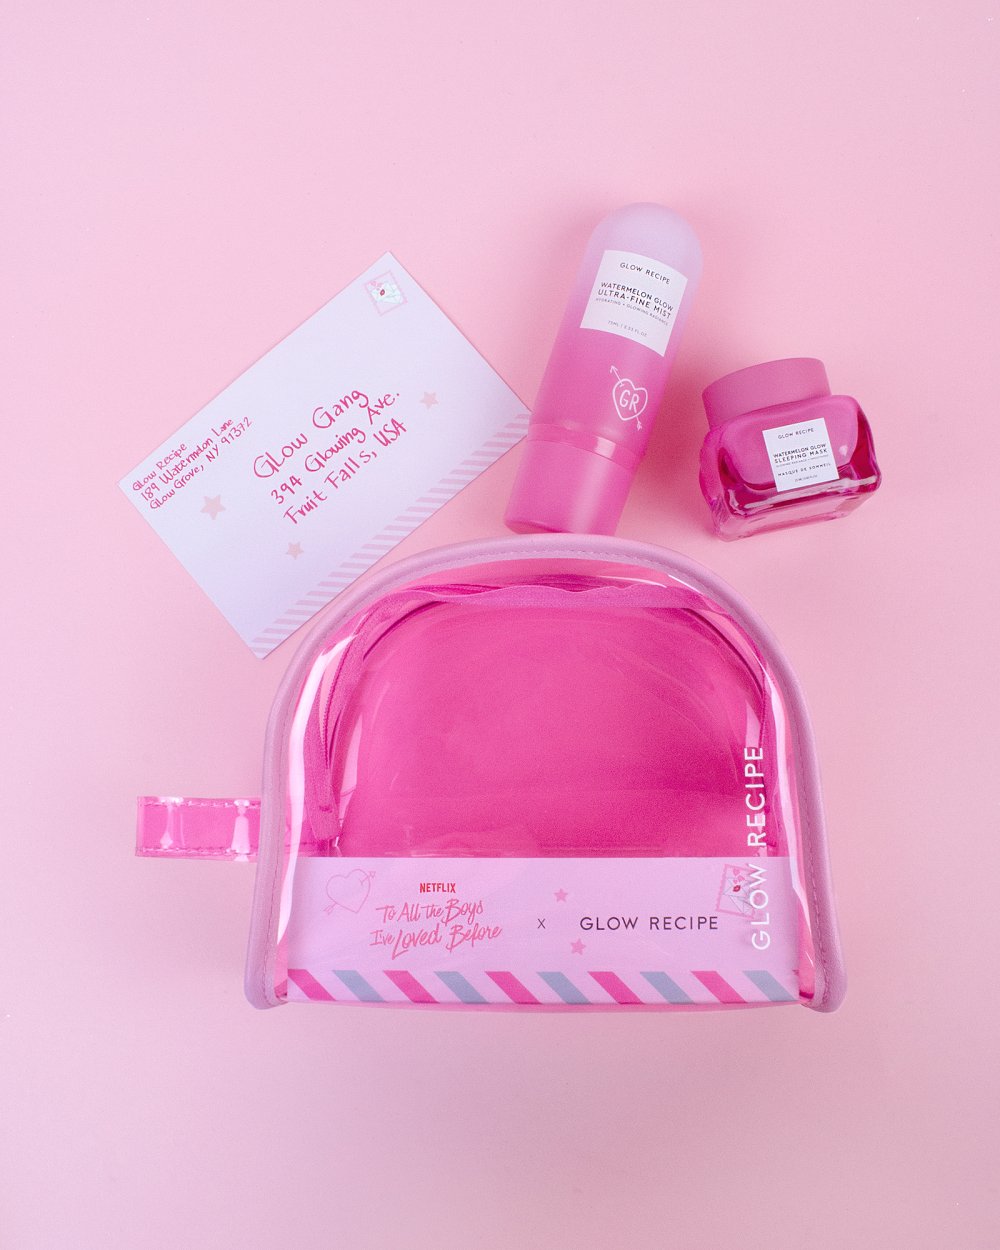 Glow-Recipe-Is-Dropping-a-'To-All-the-Boys-I’ve-Loved'-Skincare-Set